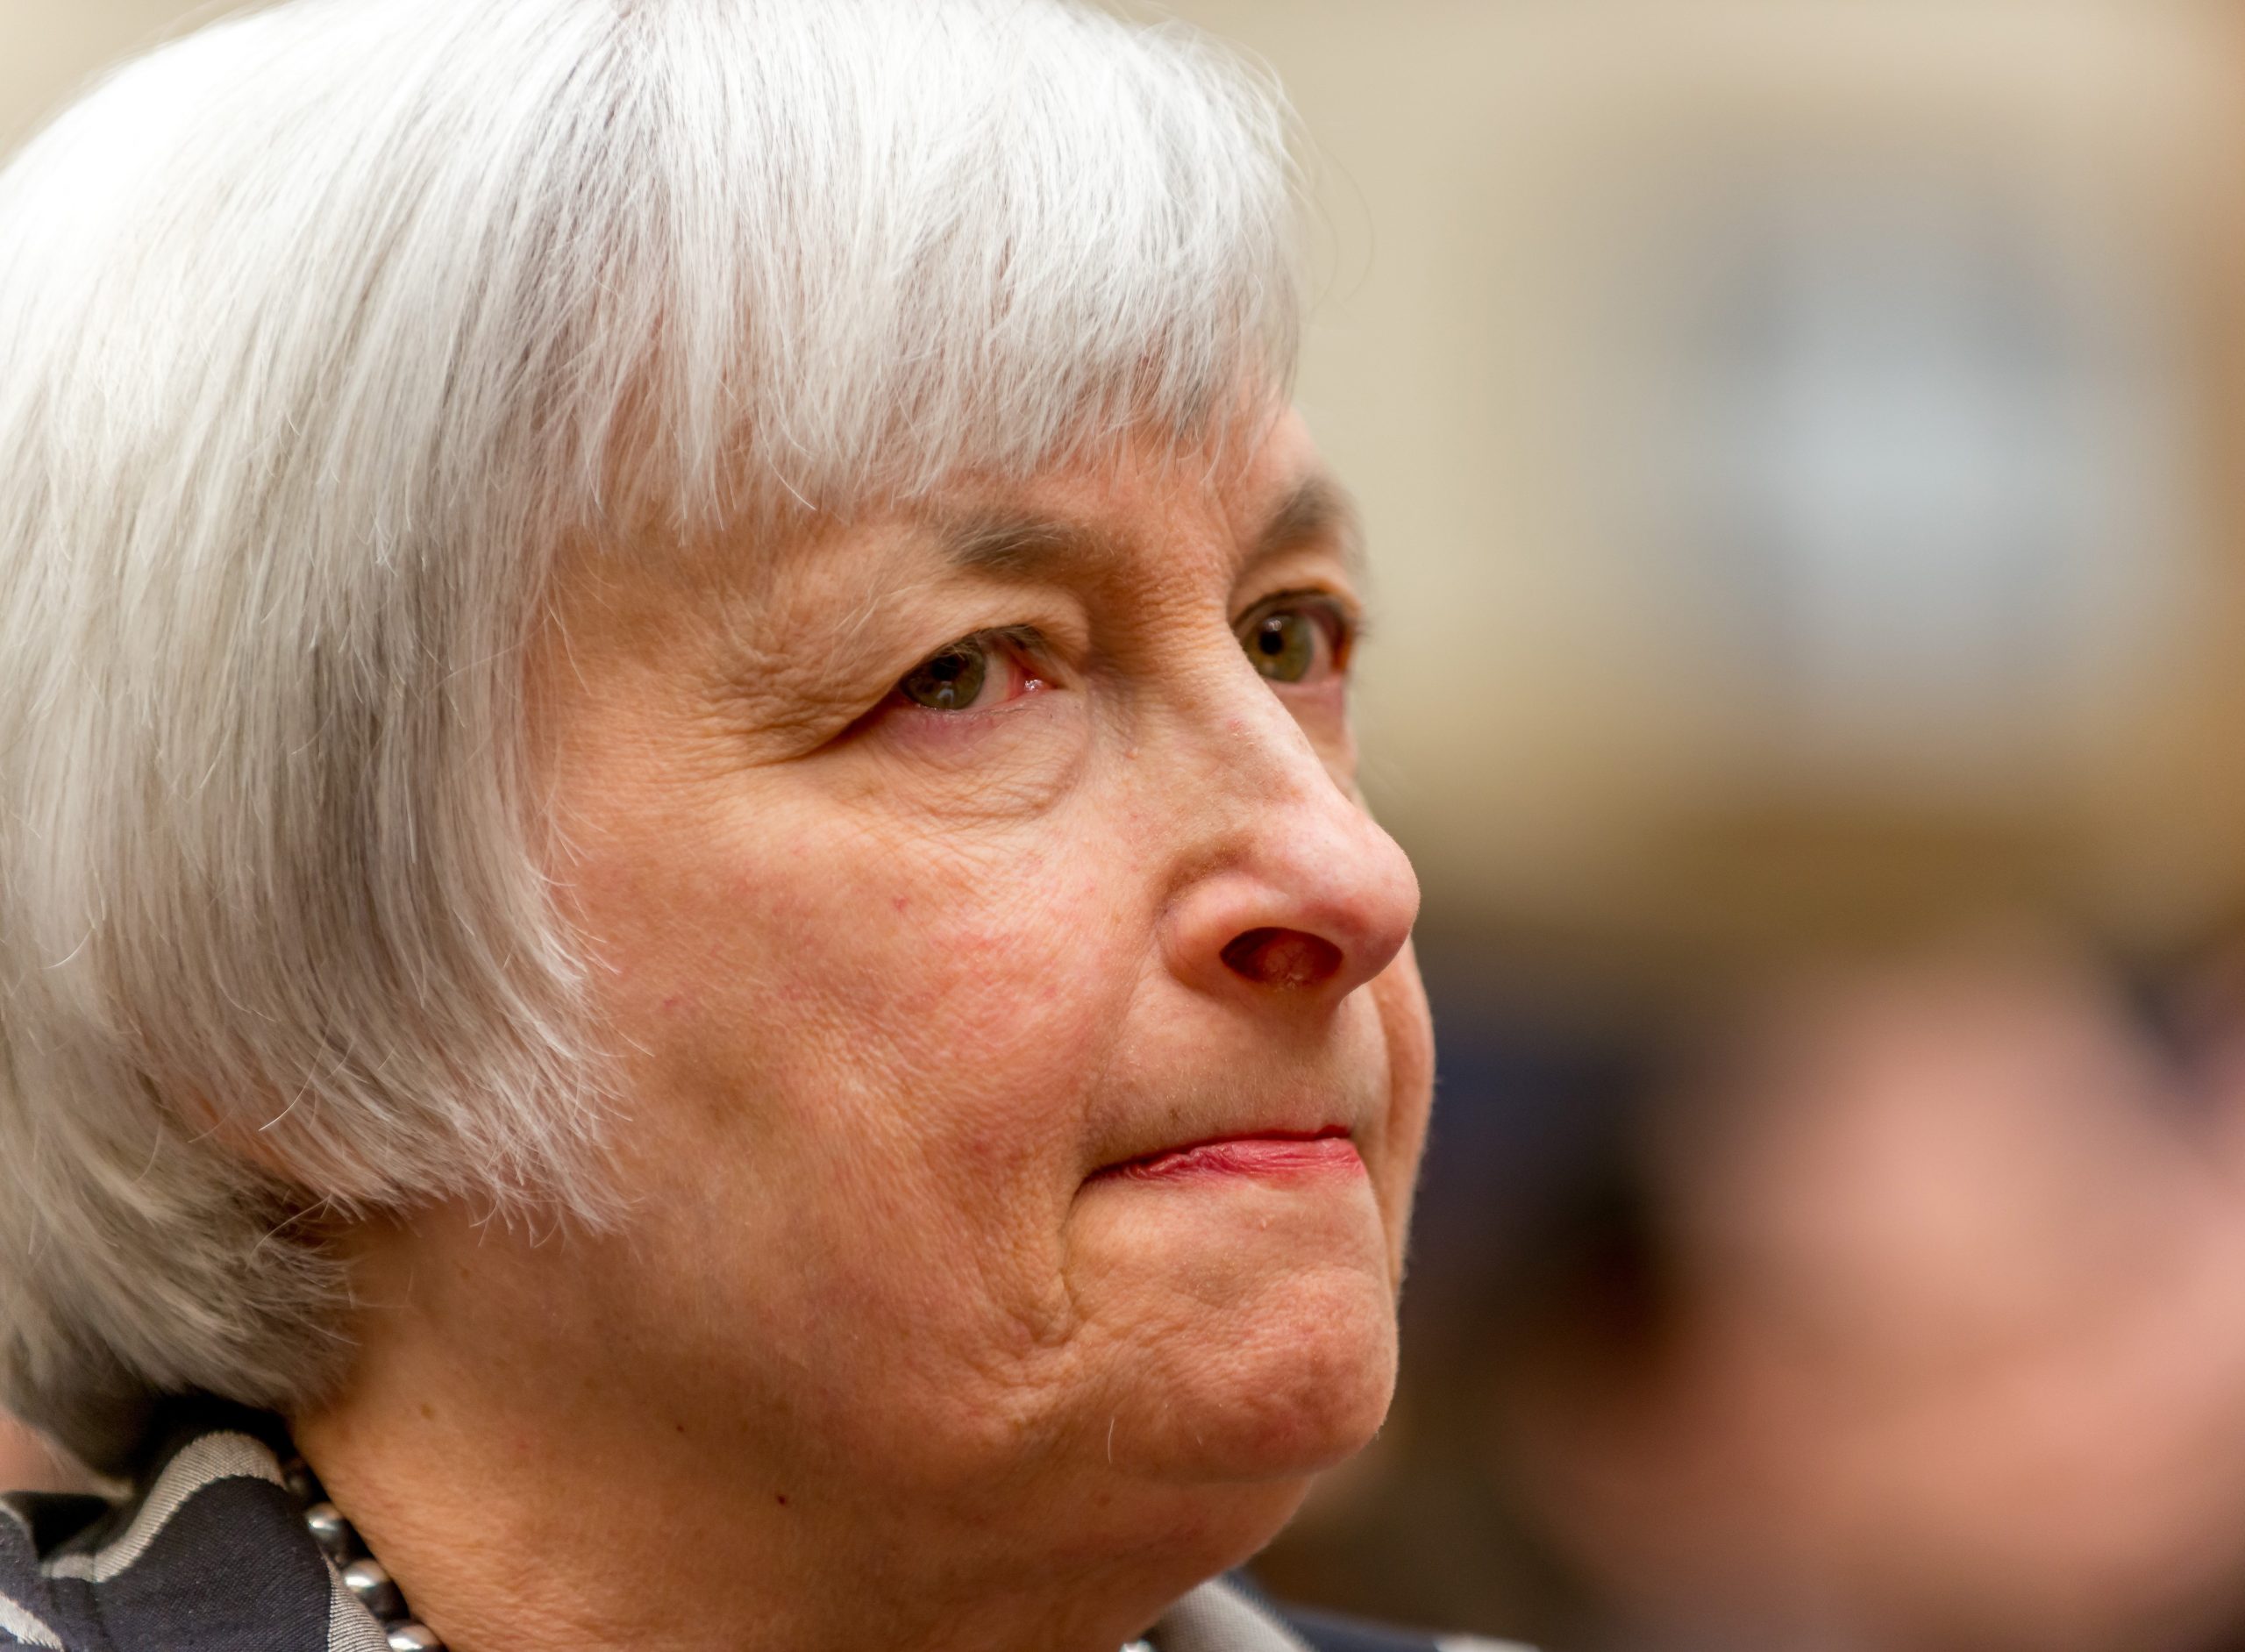 Janet Yellen makes her first appearance before Congress as the chair of the Federal Reserve